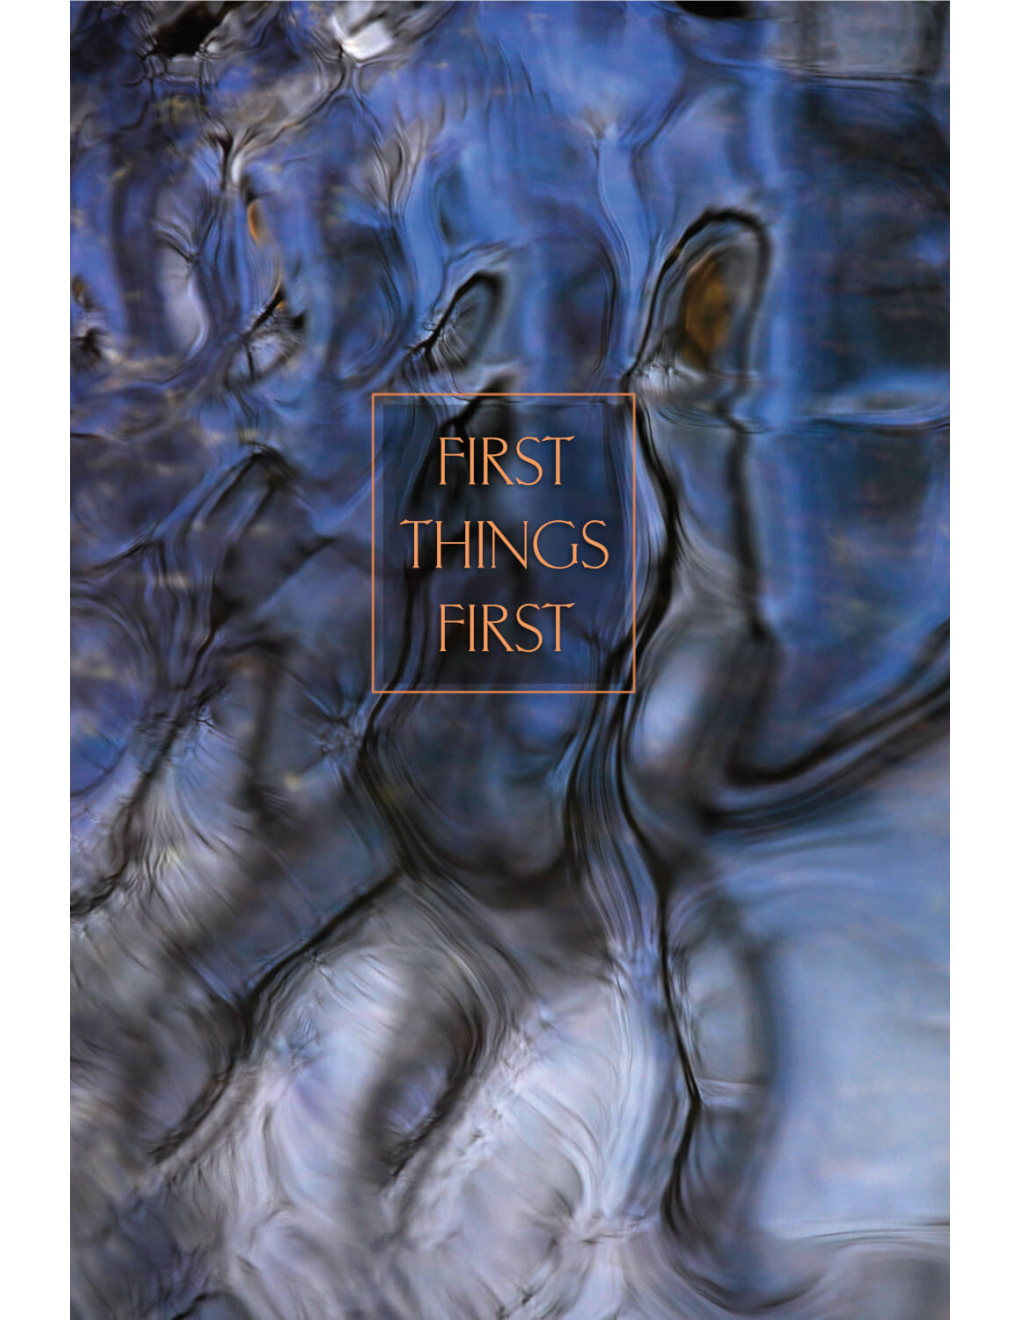 First Things First: Essays on the Buddhist Path